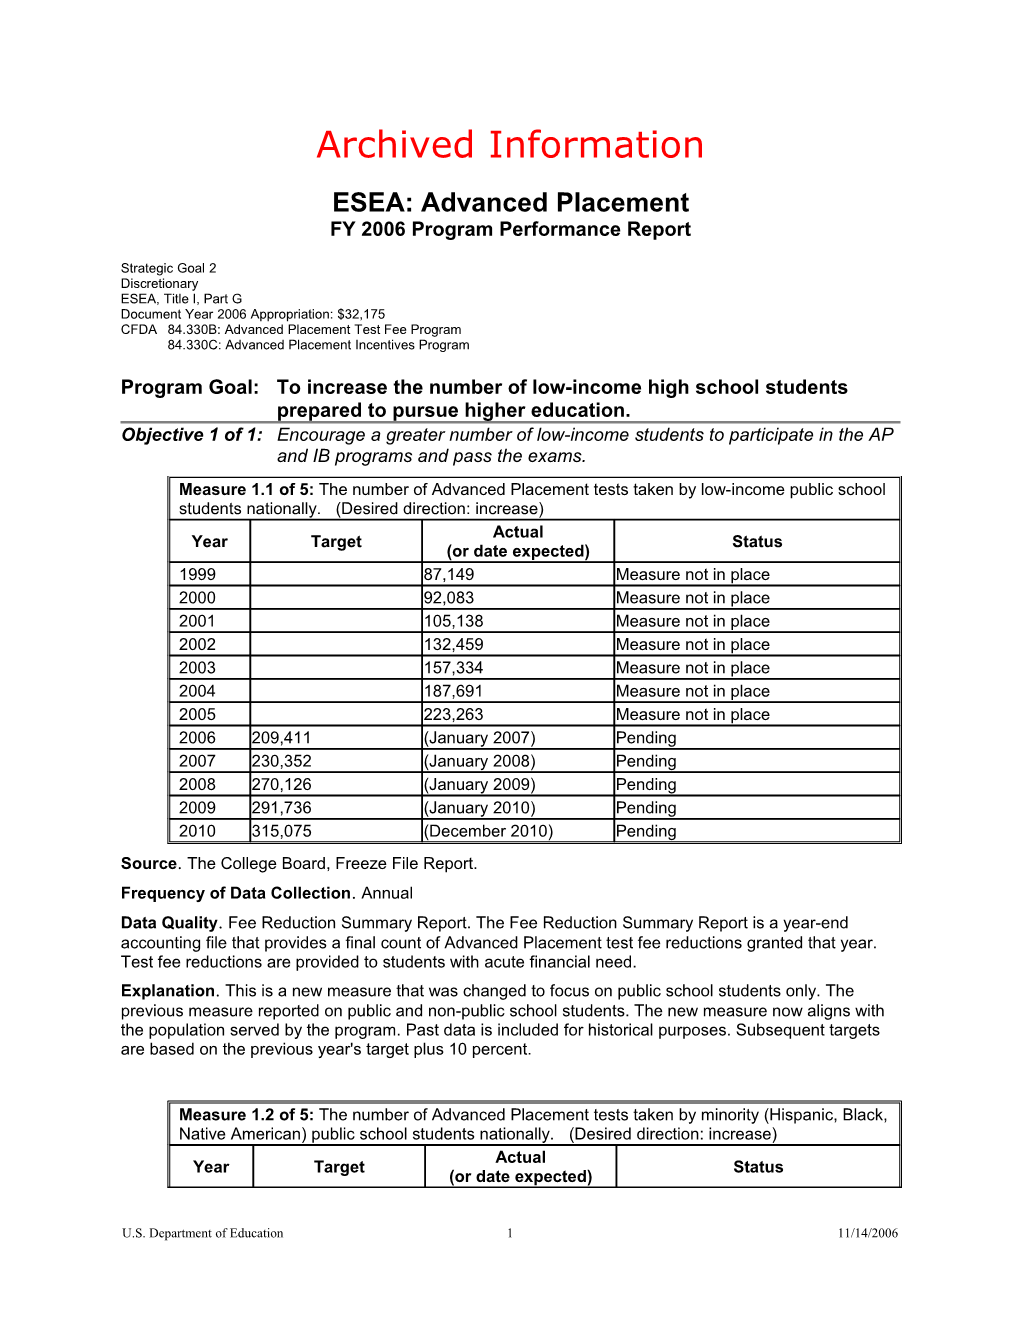 Archived: ESEA: Advanced Placement FY 2006 Program Performance Report (MS Word)